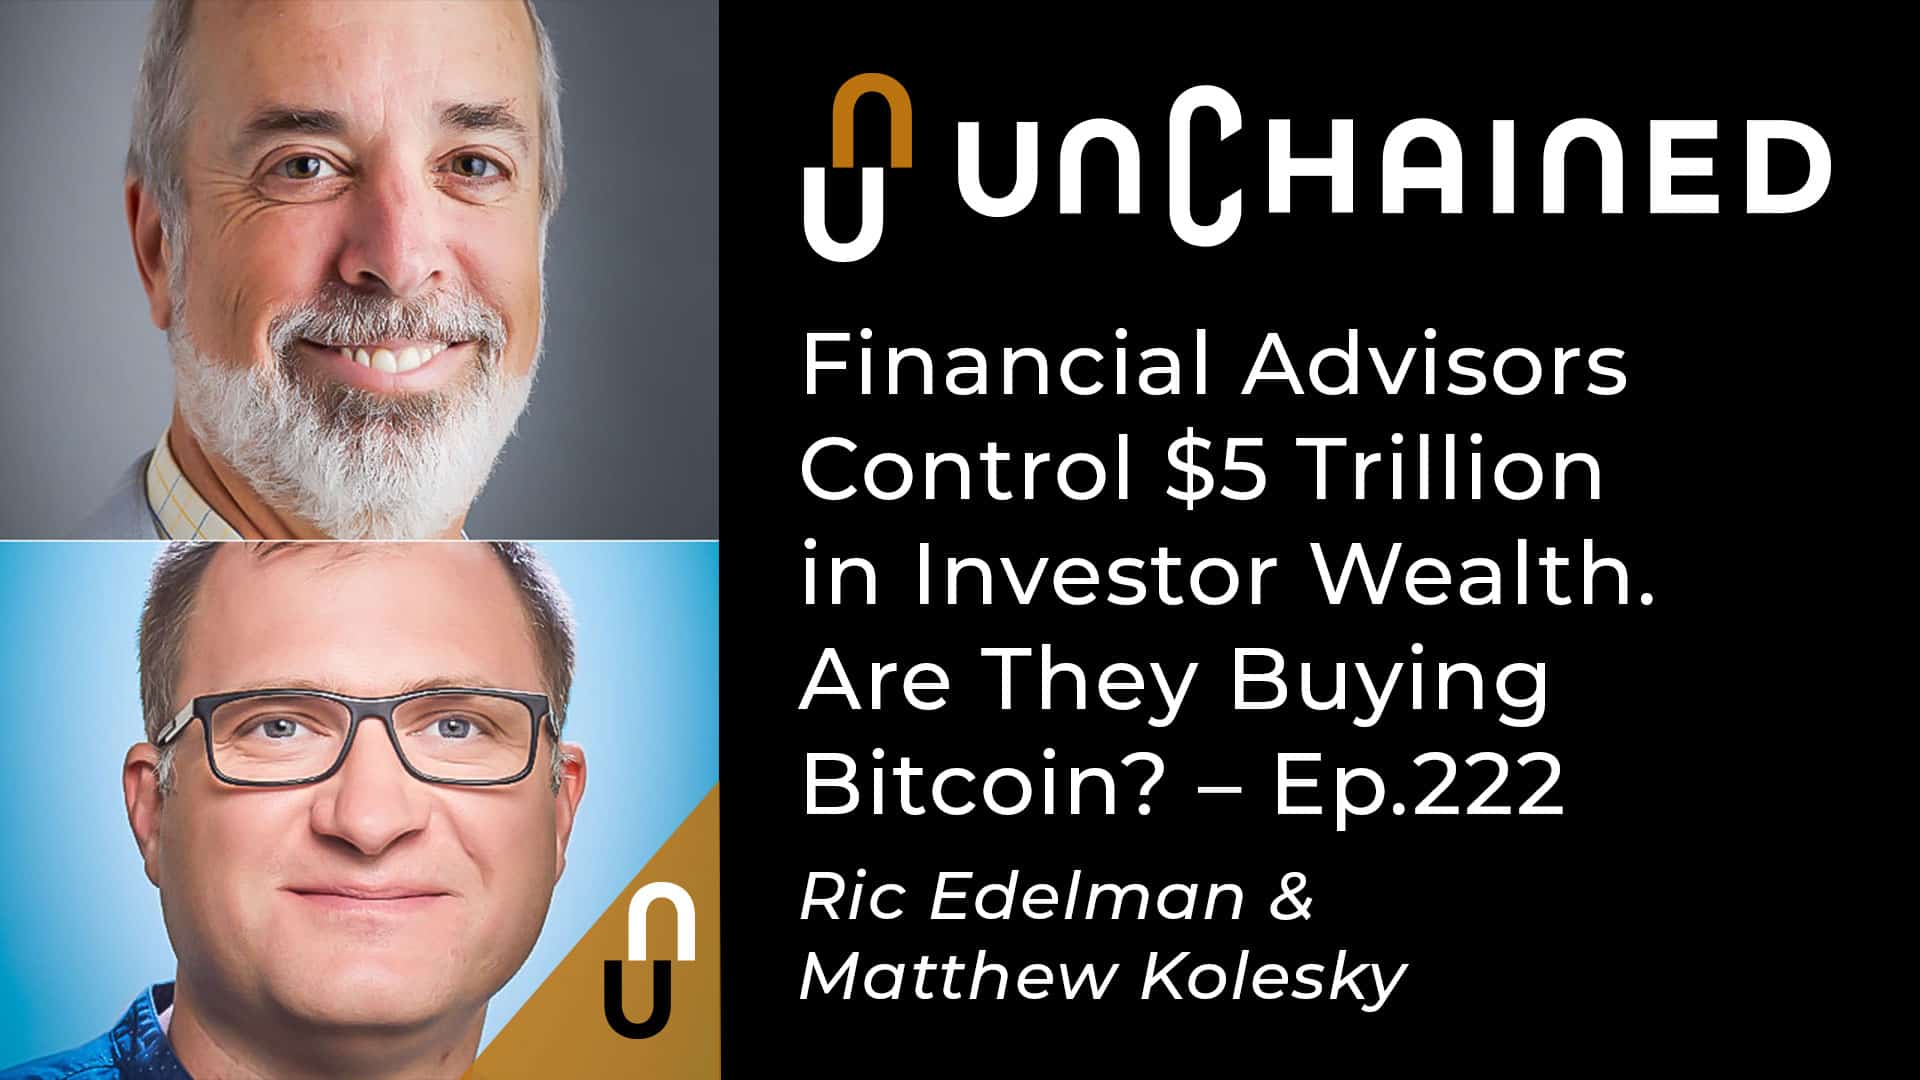 Unchained - Ep.222 - Financial Advisors Control $5 Trillion in Investor Wealth. Are They Buying Bitcoin?